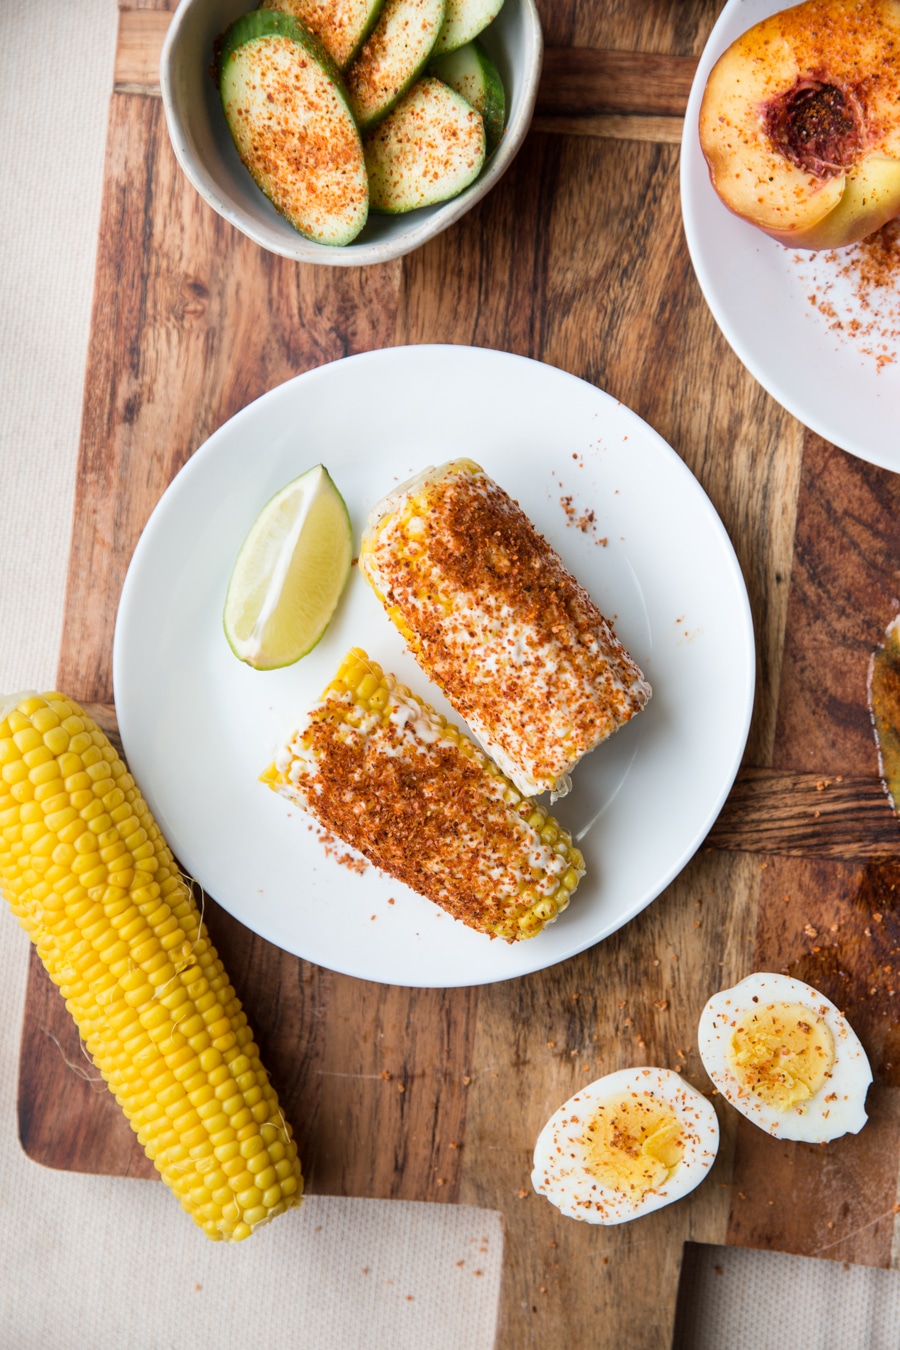 5 Ways to Use the New Trader Joe's Elote Seasoning - Cupcakes & Cashmere